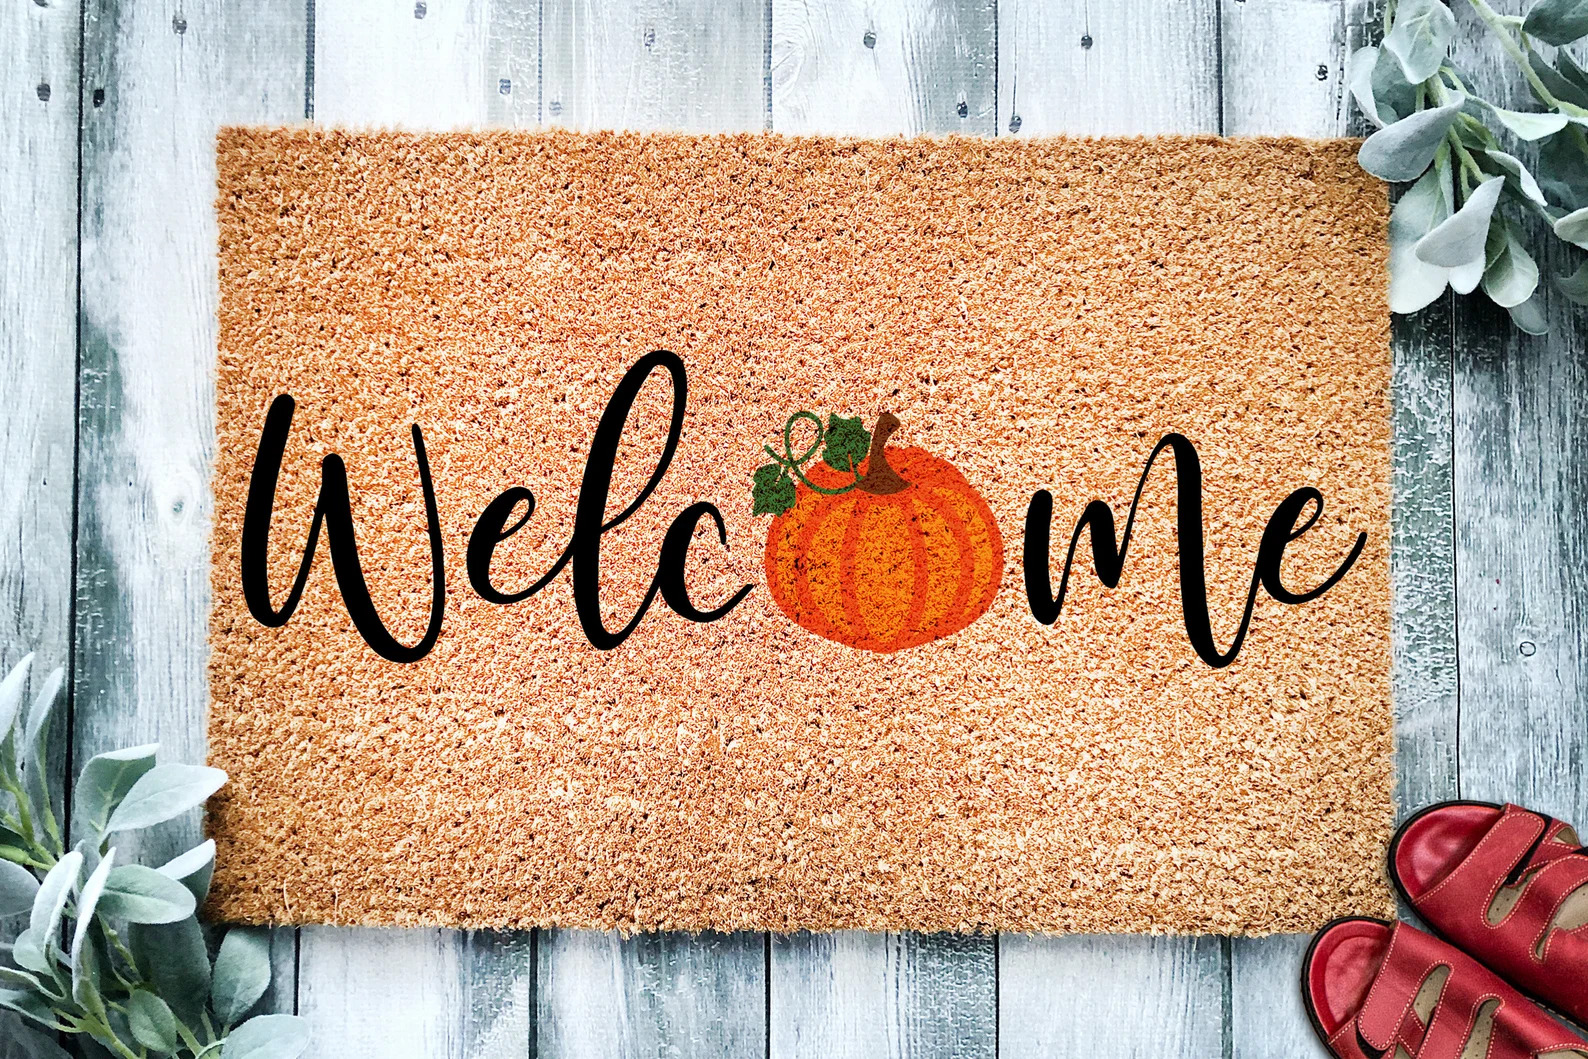 15 Charming Fall Doormat Designs That Will Welcome You With The Season's Greetings